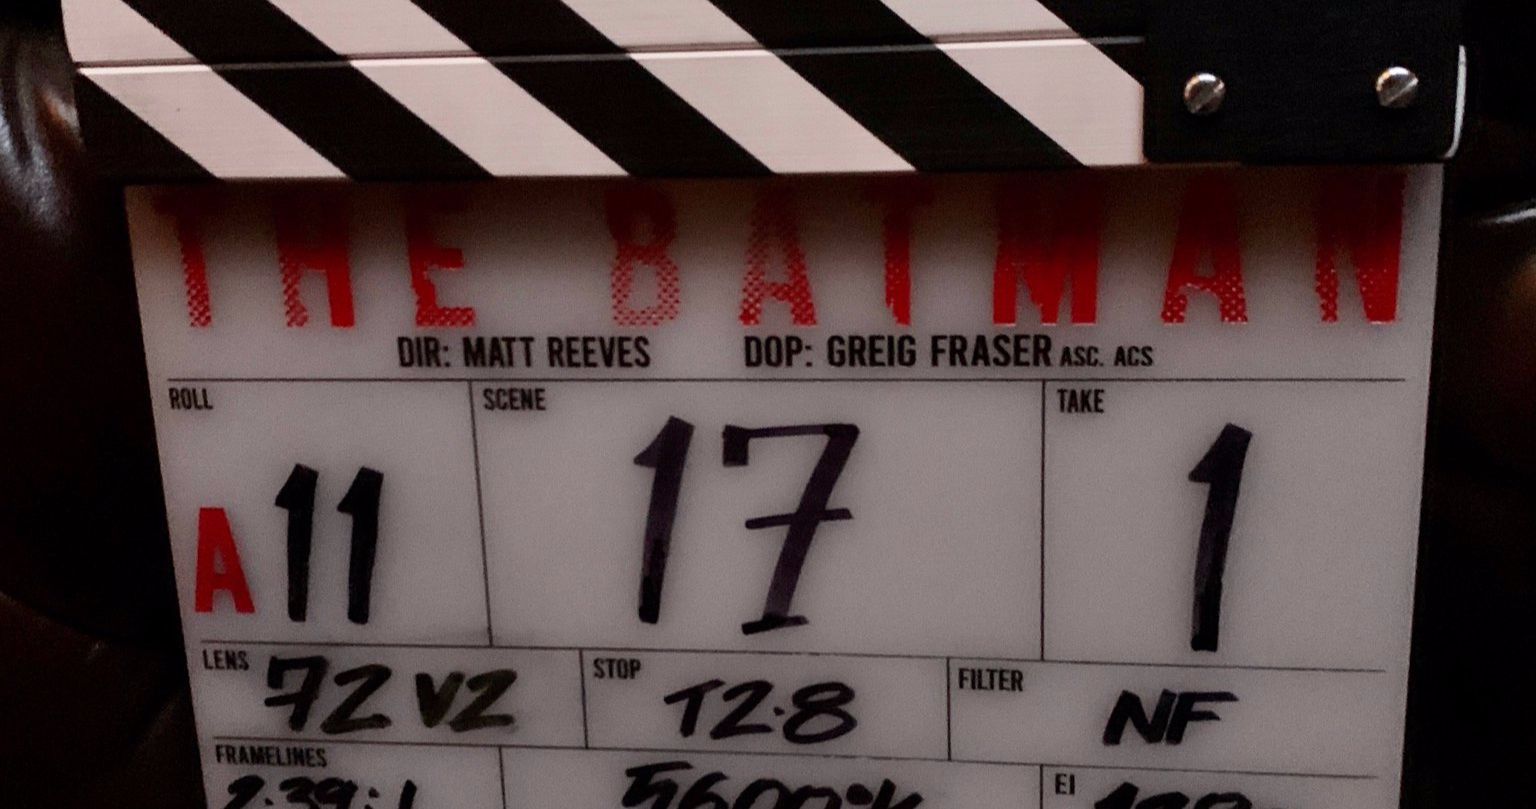 The Batman Officially Begins Shooting as the Director Shares First Set Photo